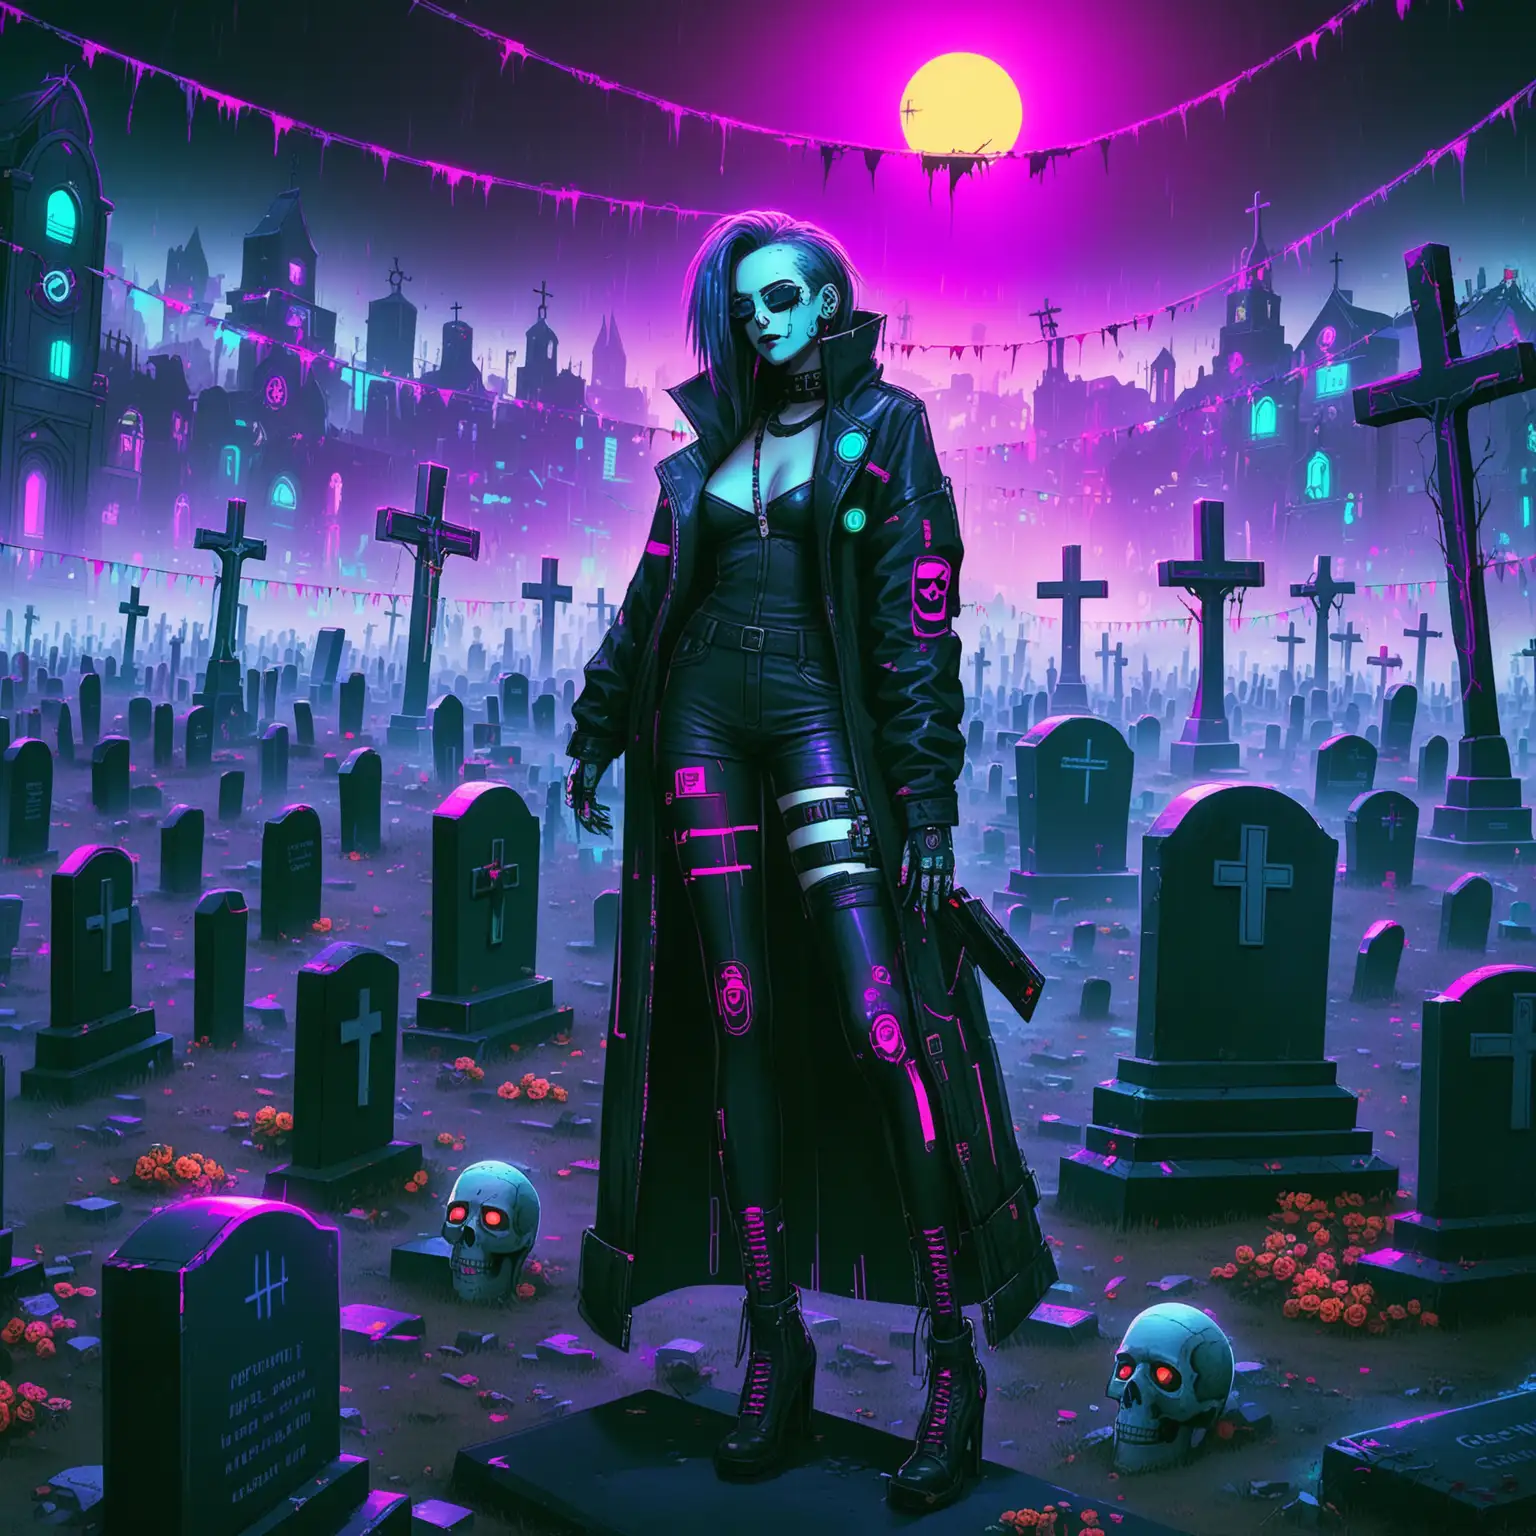 Cyberpunk-Party-in-a-Graveyard-at-Night